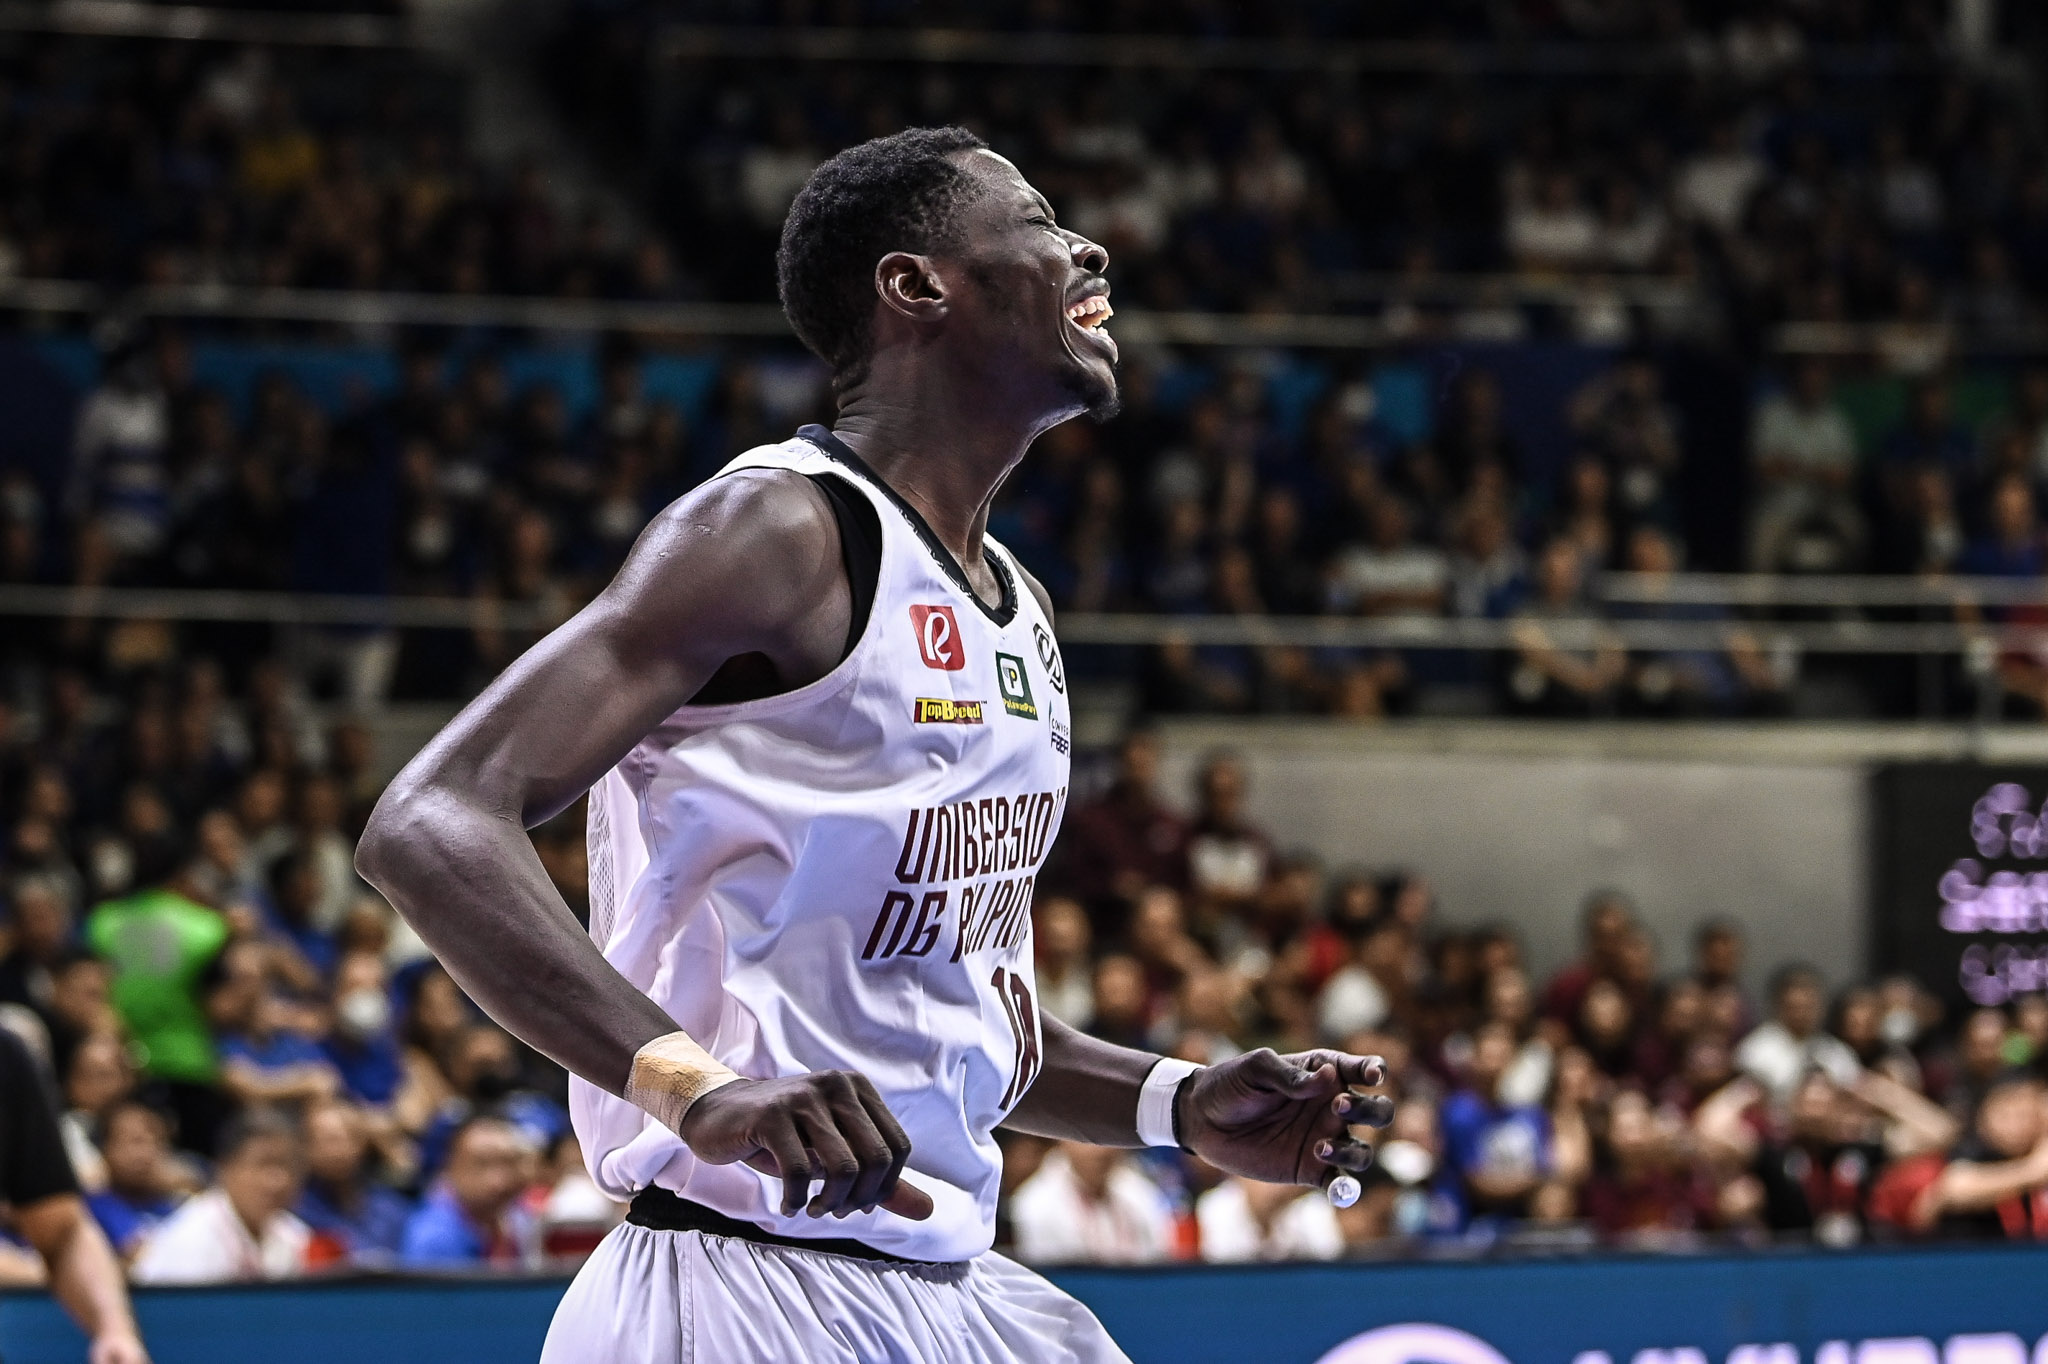 UAAP86-MBB-Malick-Diouf-0895 Malick Diouf driven by desire for title in culminating season: Eyes championship Basketball News UAAP UP  - philippine sports news